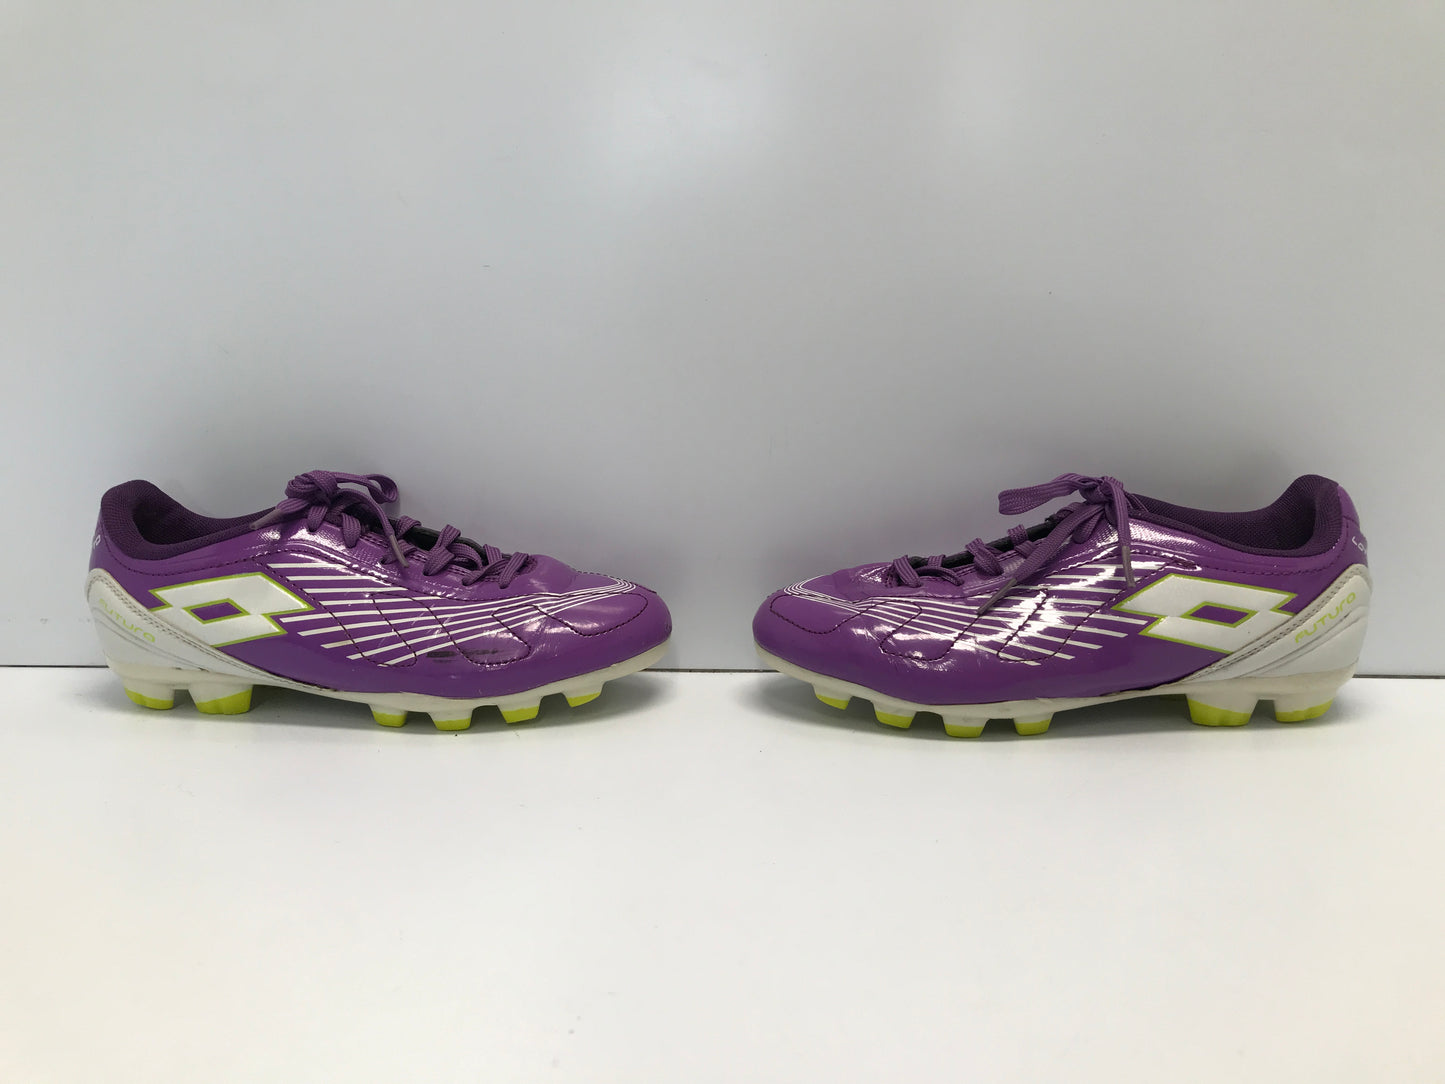 Soccer Shoes Cleats Child Size 4 Lotto Purple Lime White Excellent